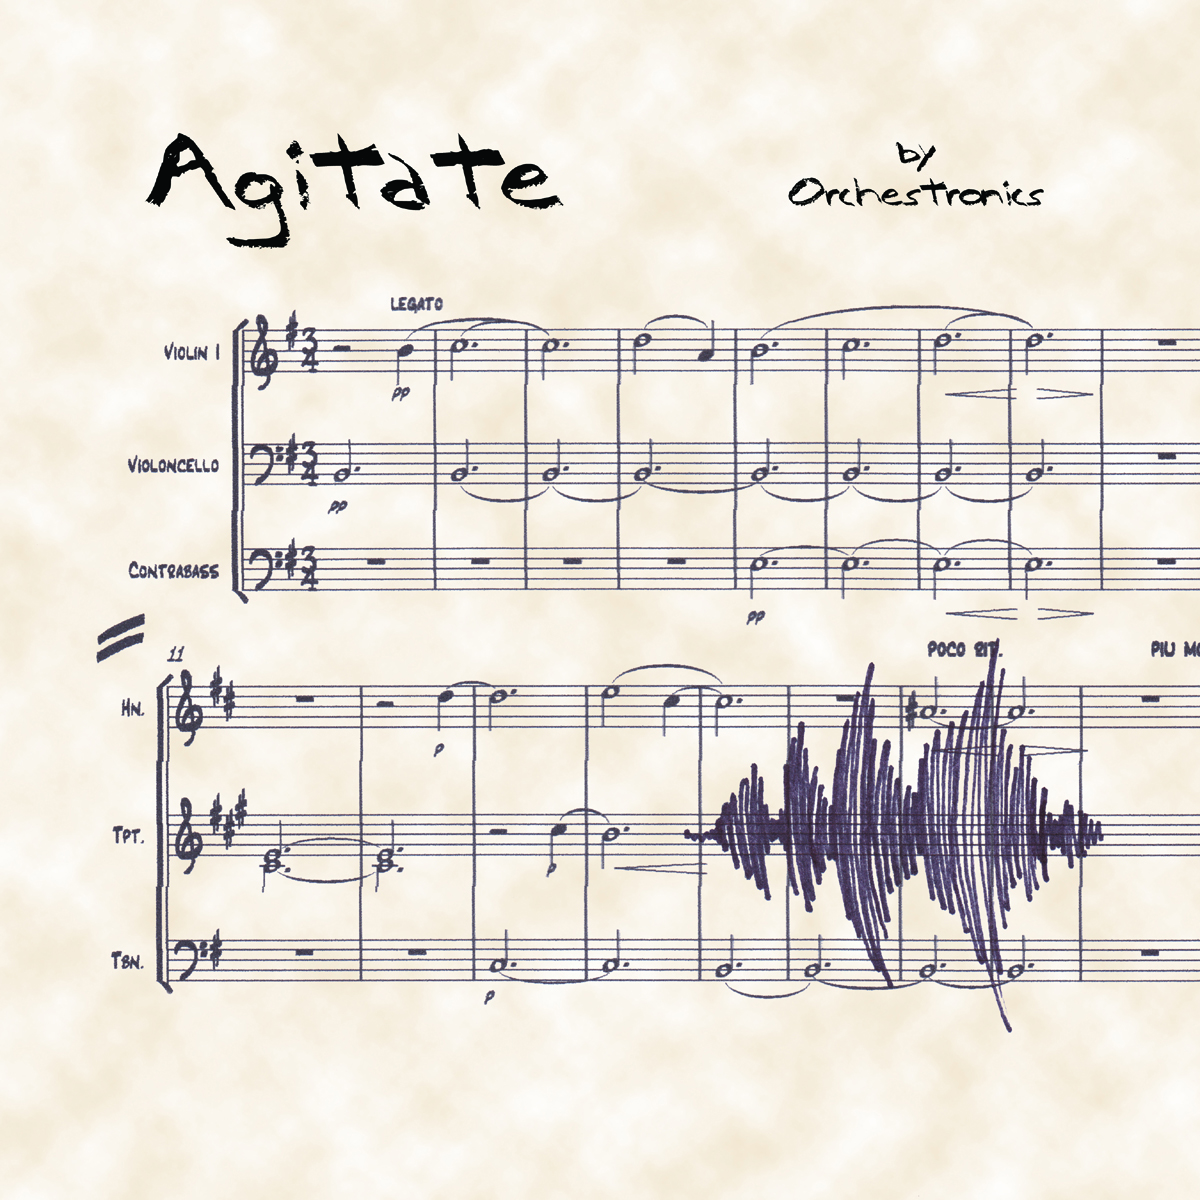 Agitate CD, by Orchestronics